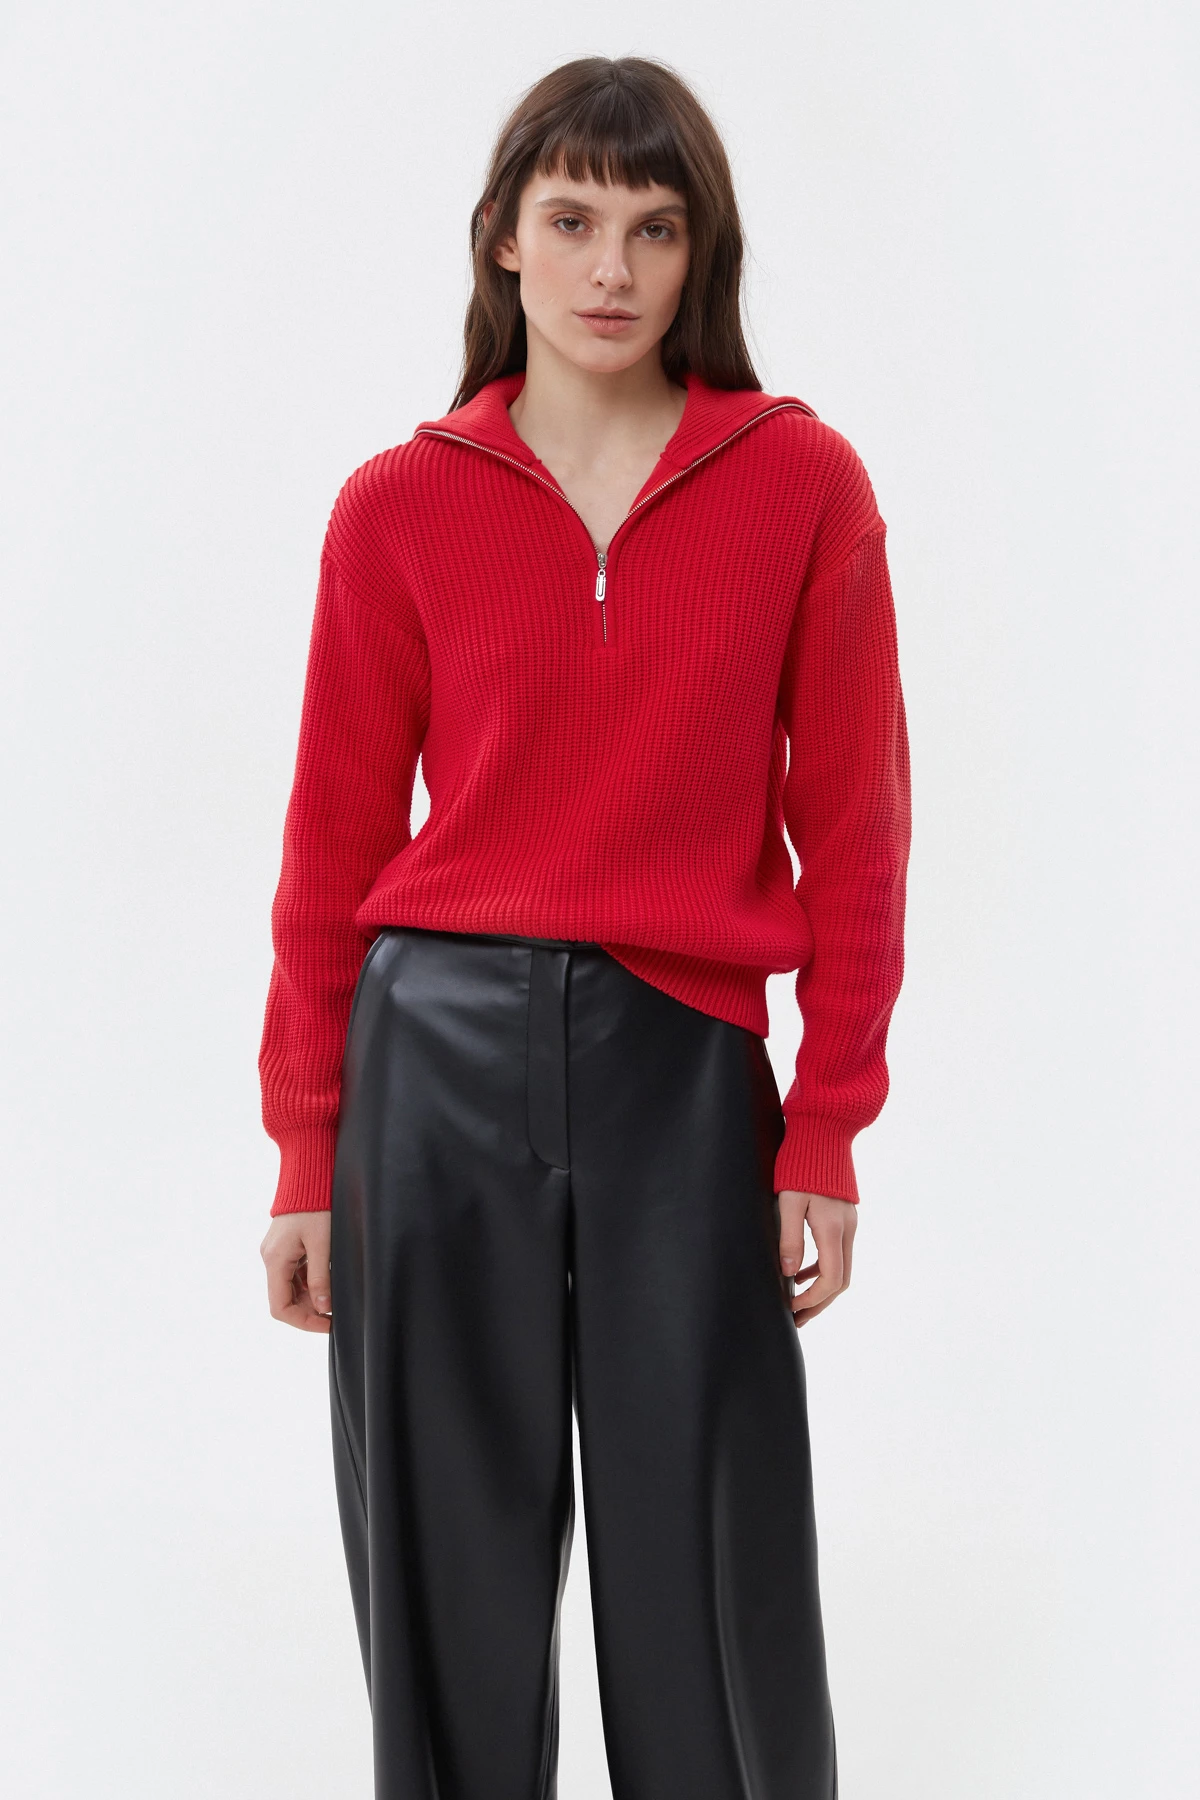 Red cotton zip-up knit sweater, photo 2